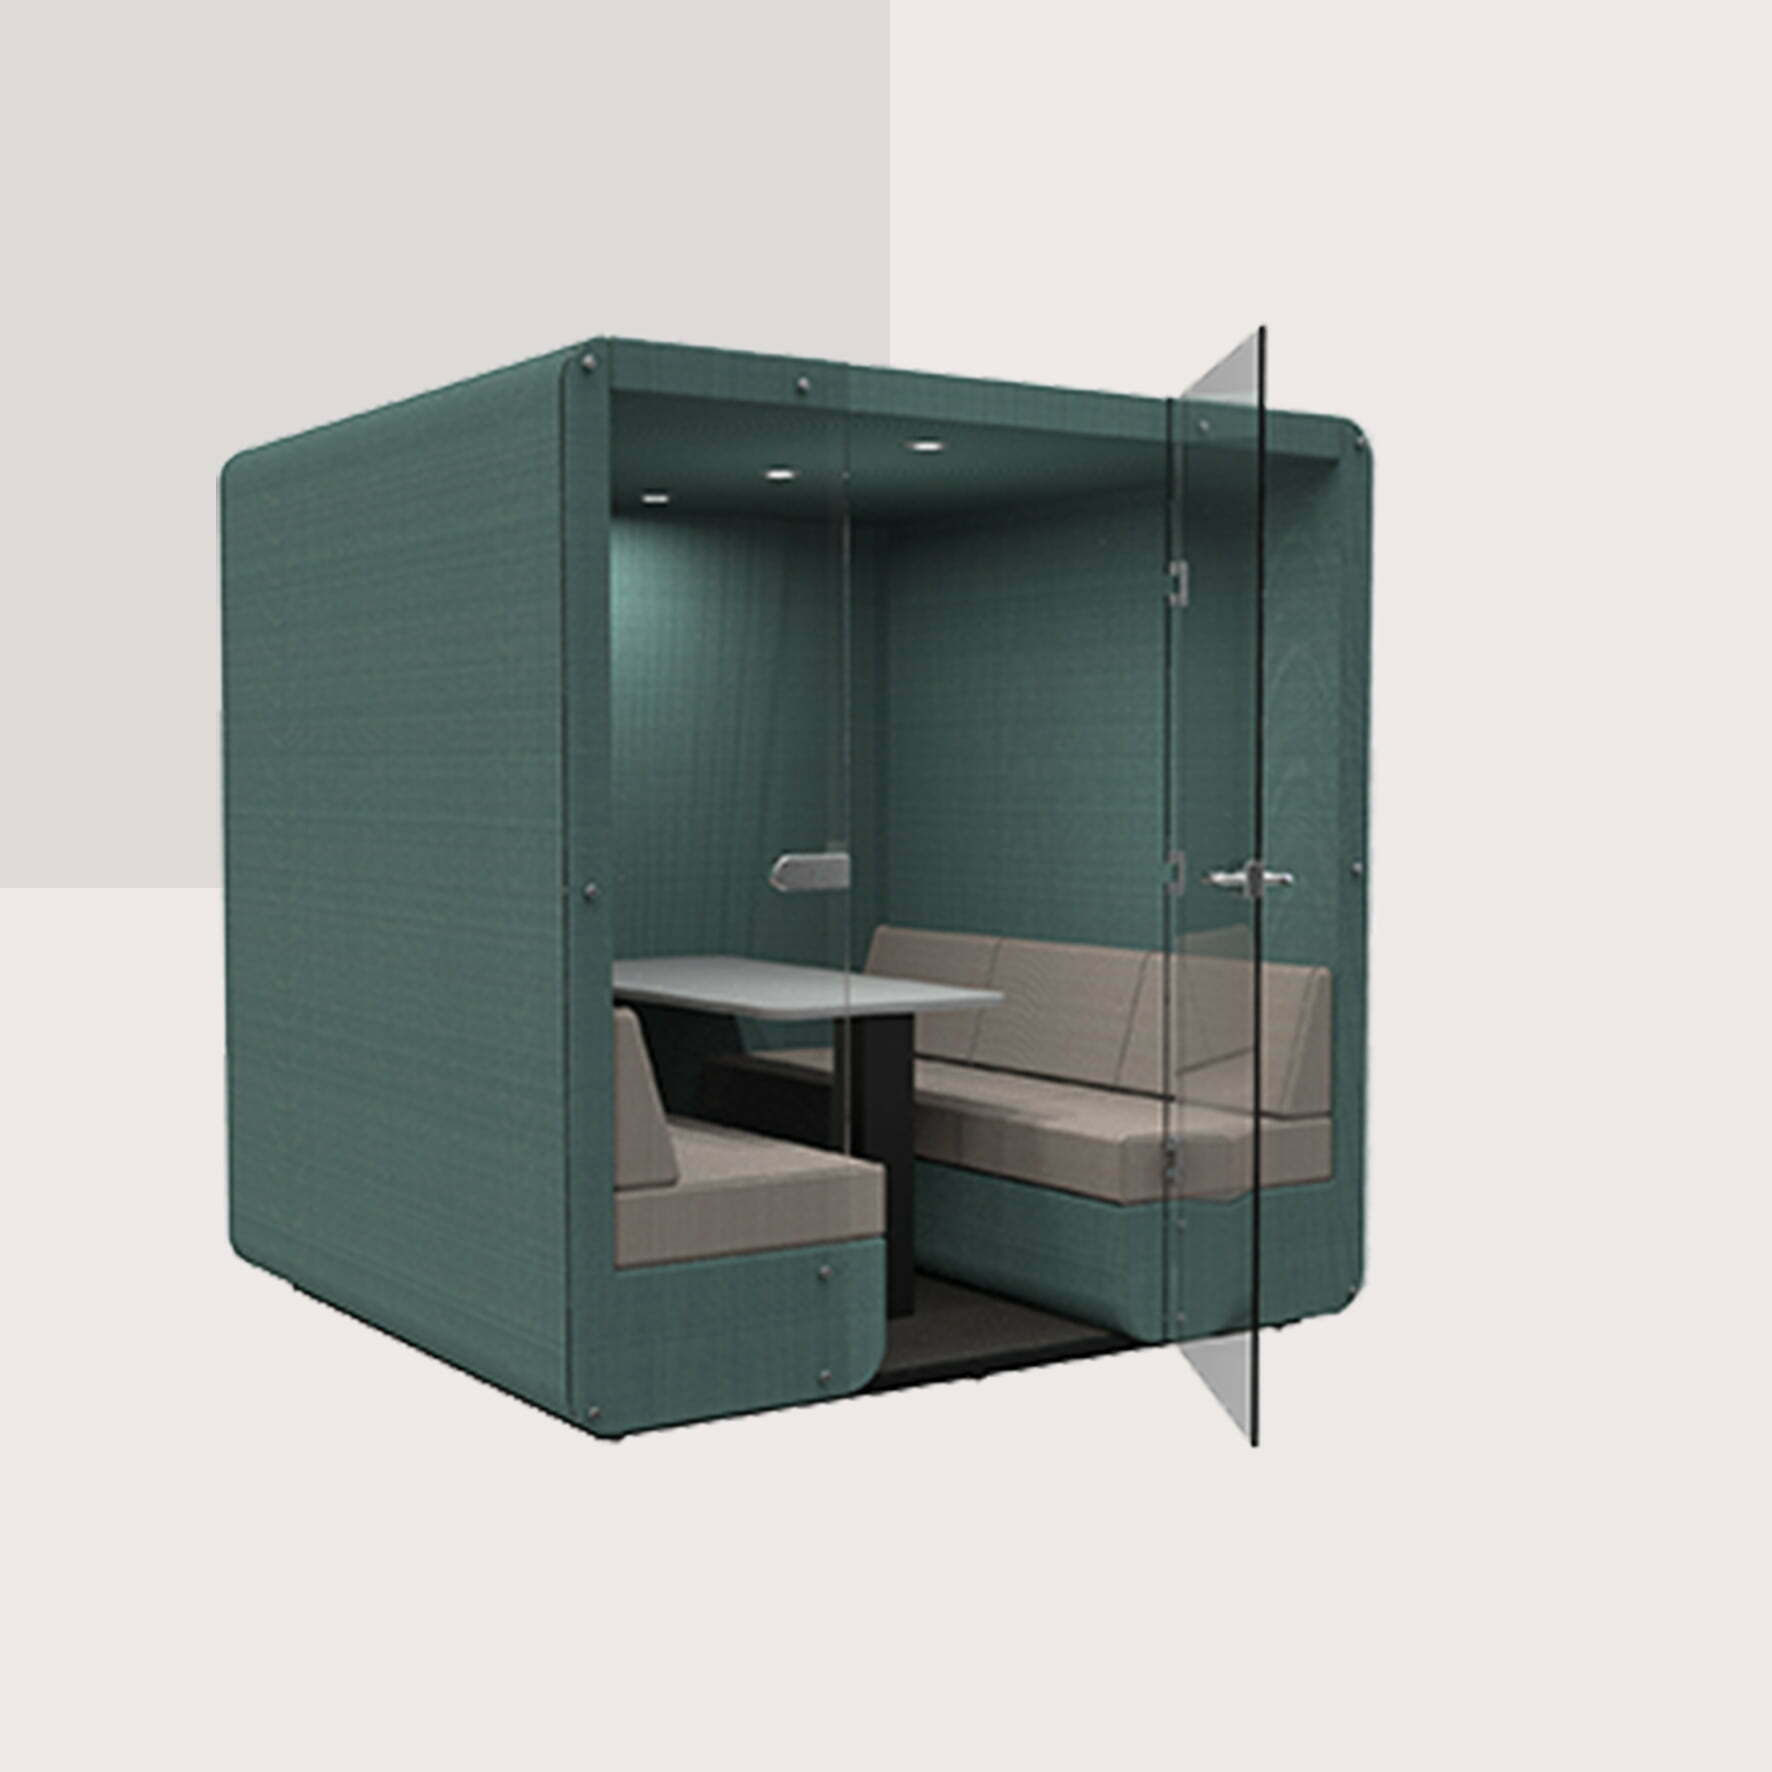 Bob 6 seat booth with glass door and upholstered end wall